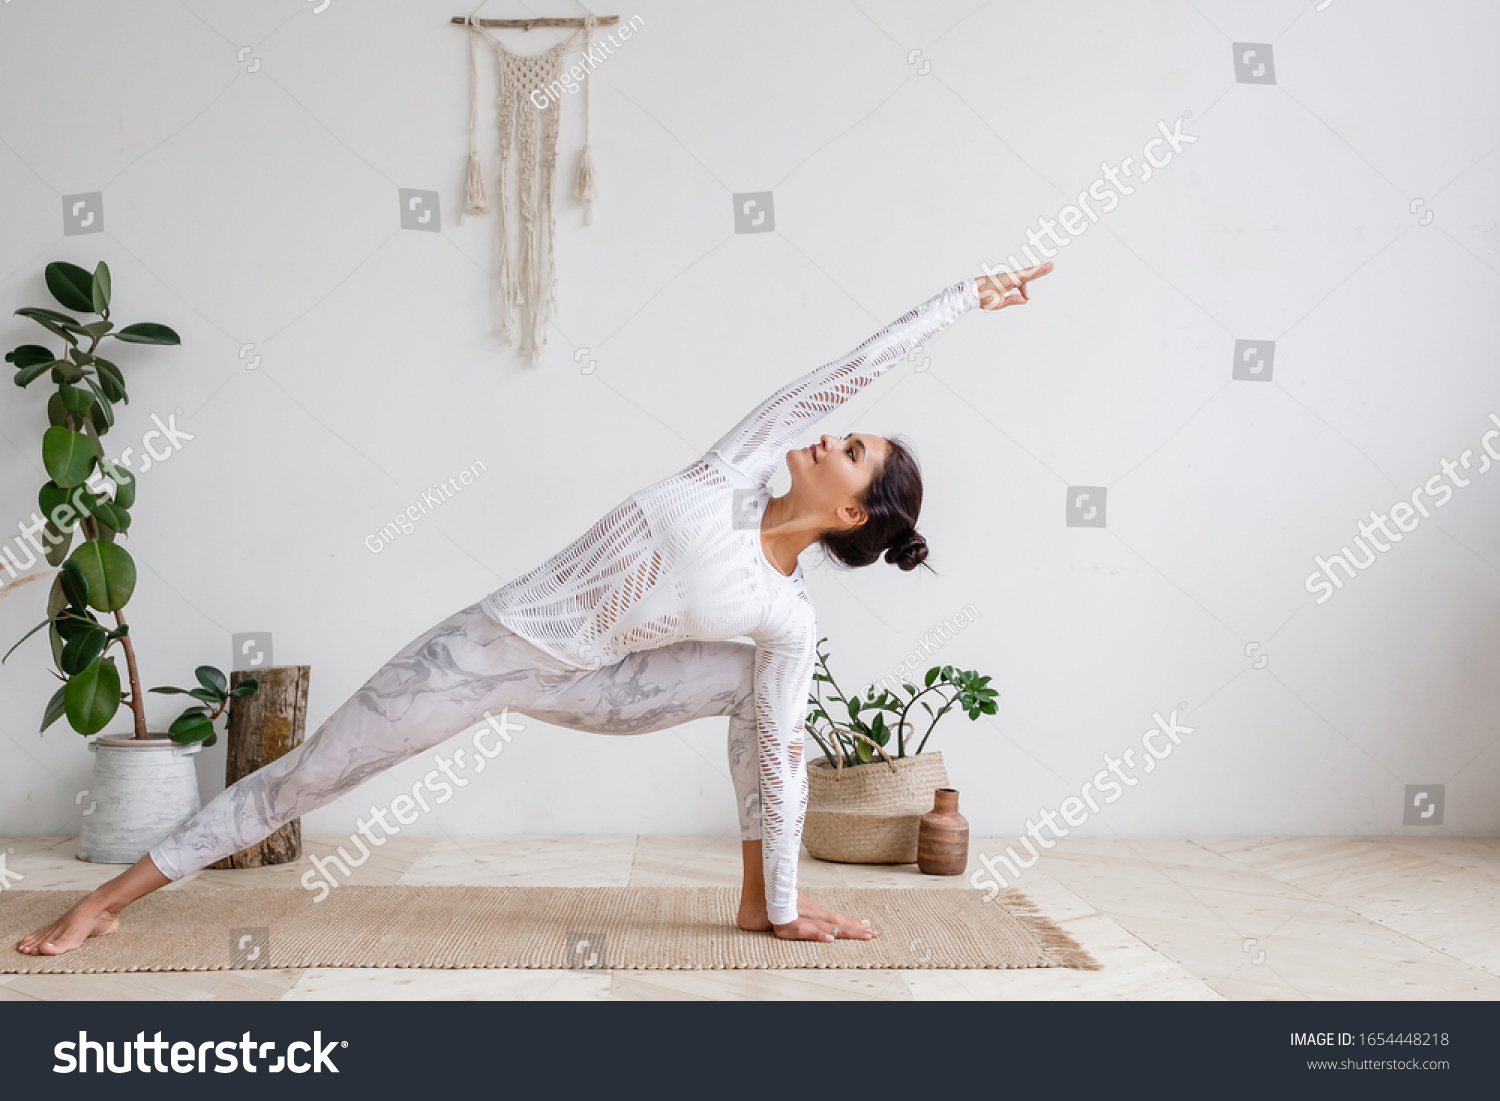 Side view of slim pretty positive young brunette woman doing Utthita parsvakonasana exercise, Extended Side Angle pose, on mat on floor surrounded by houseplants on white wall. Yoga and pilates #1654448218